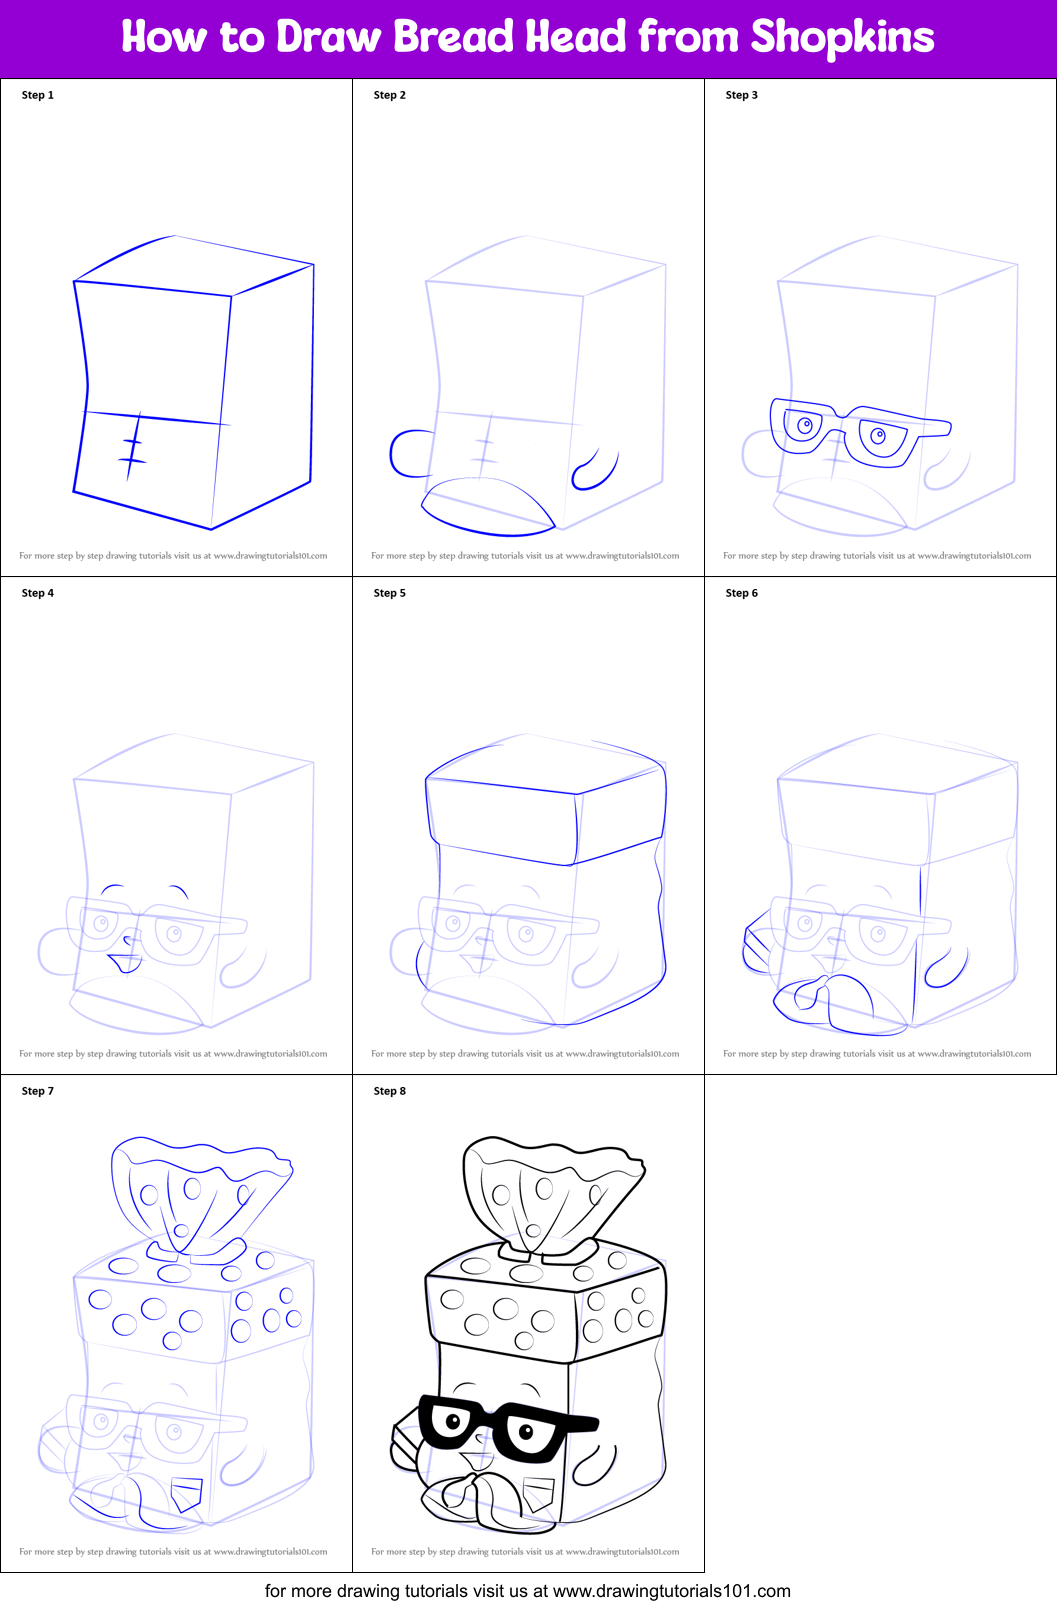 Download How to Draw Bread Head from Shopkins printable step by step drawing sheet : DrawingTutorials101.com